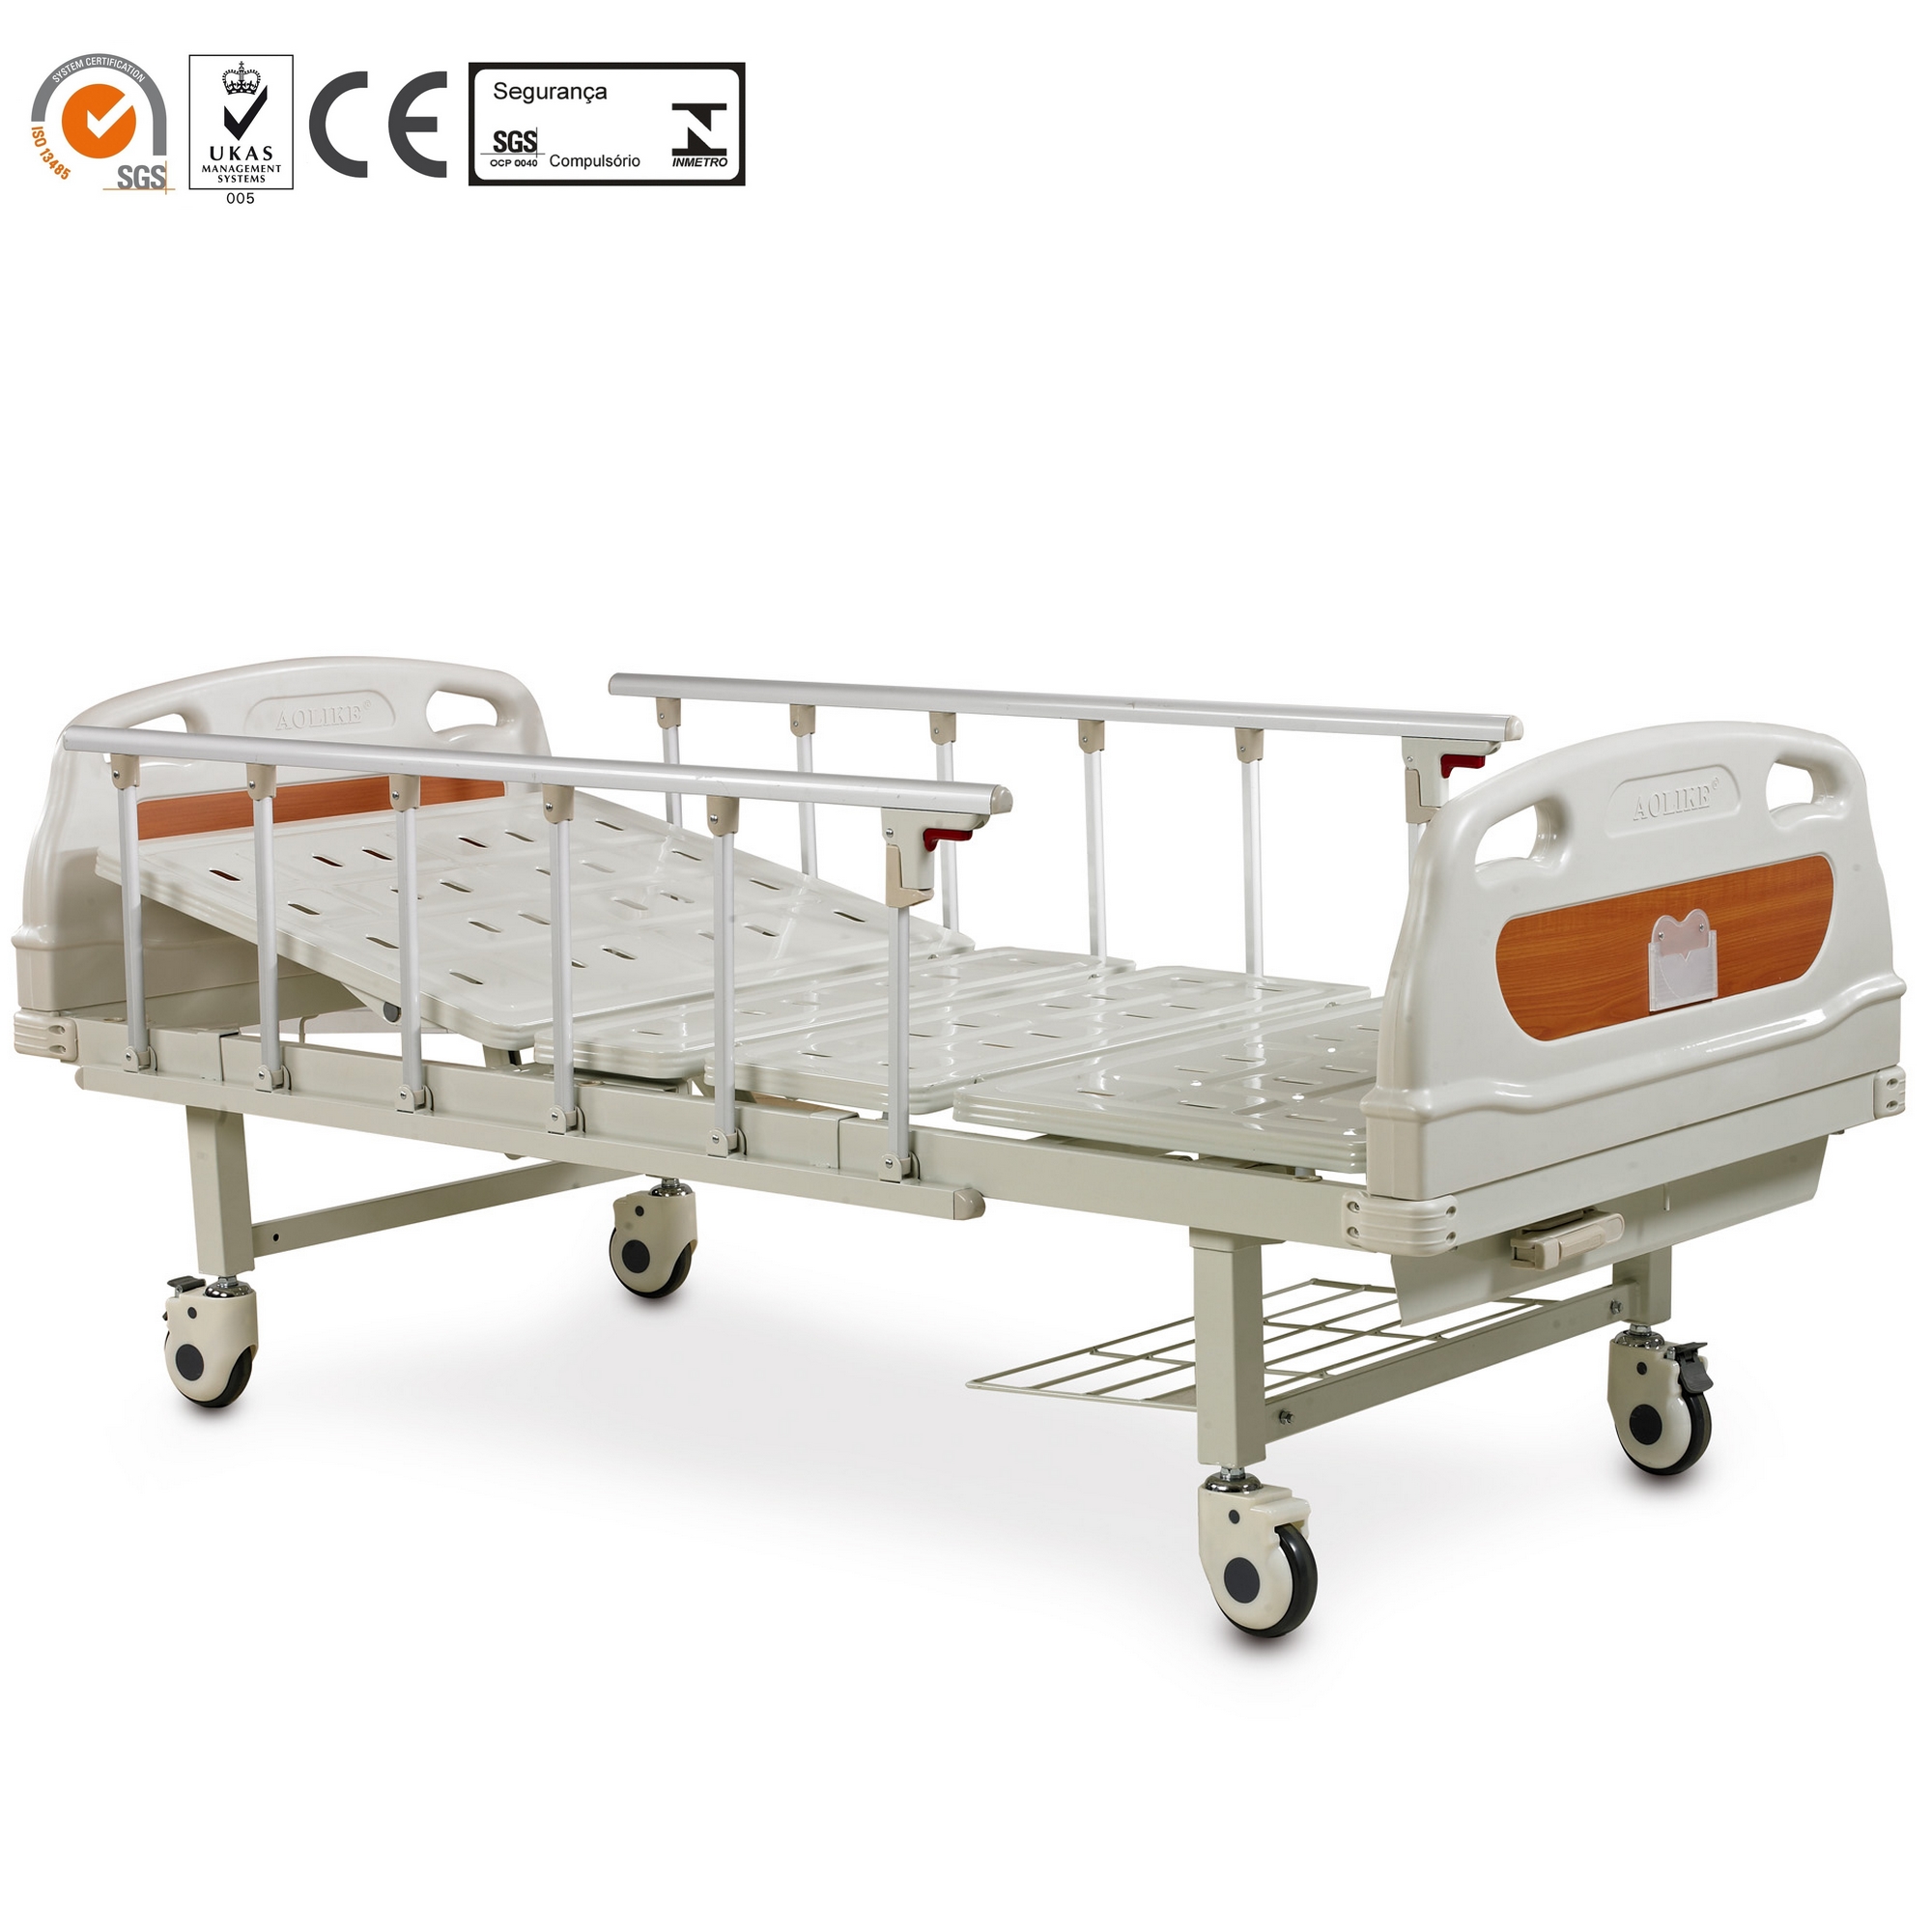 Bestseller Good Price Hospital Furniture Manufacturers 2 Functions Two Cranks Manual medical bed